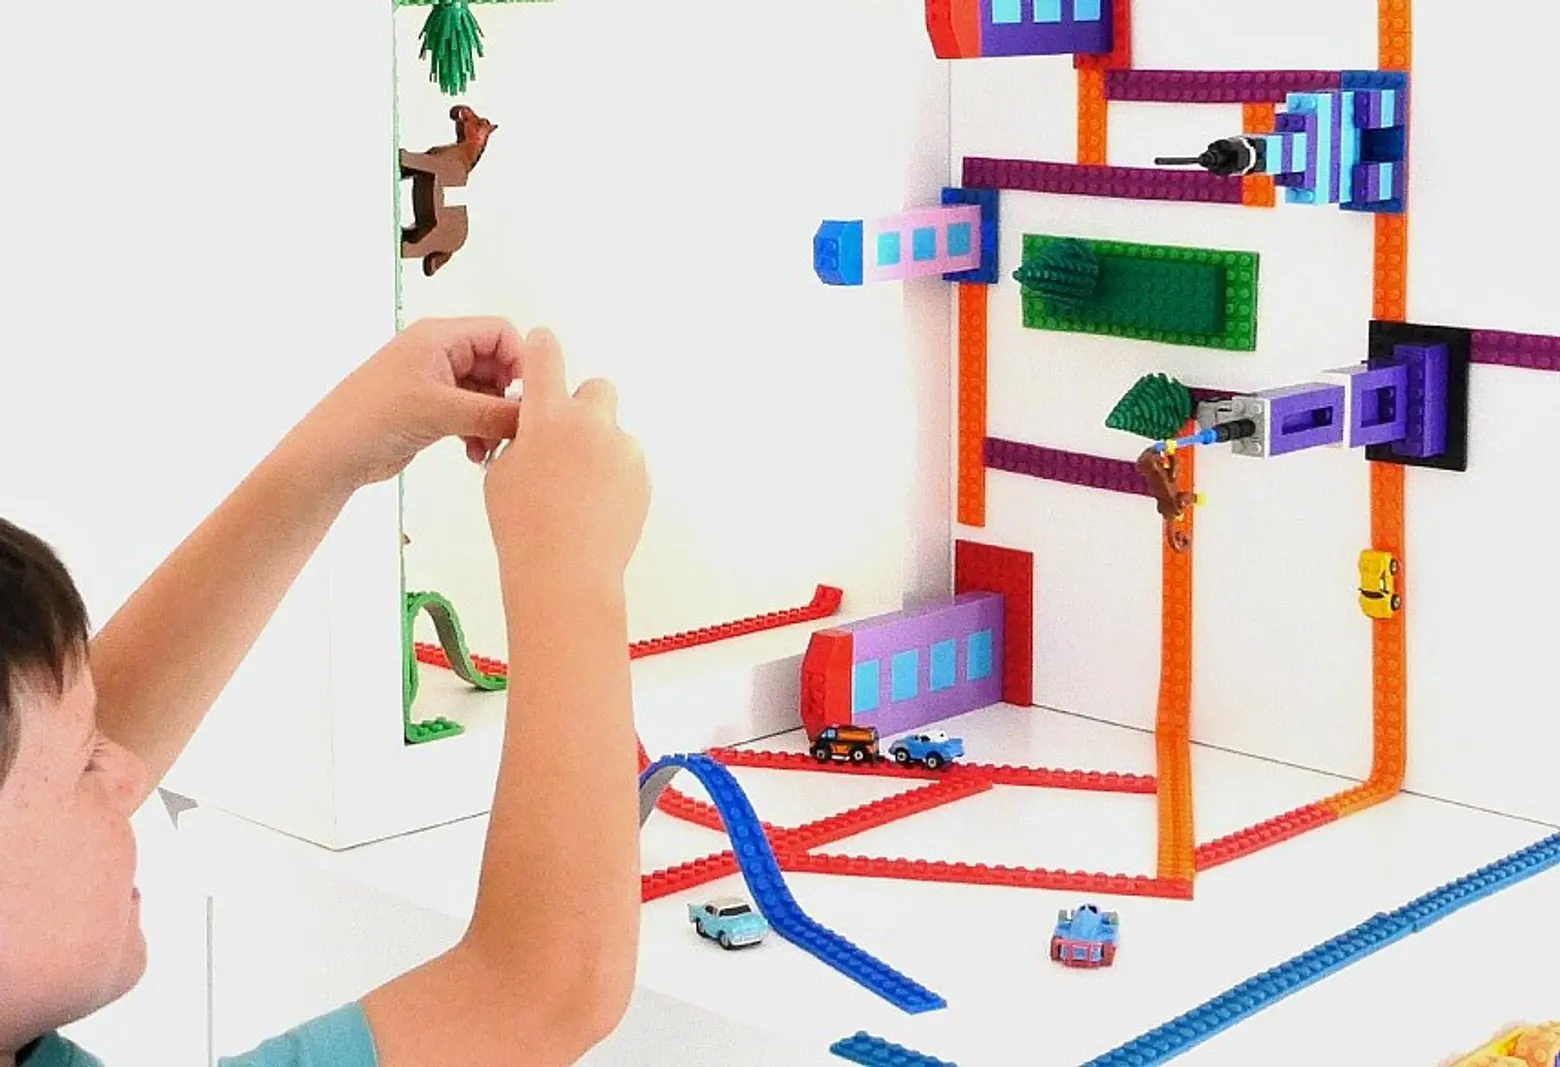 Nimuno tape transforms any surface into LEGO-friendly territory